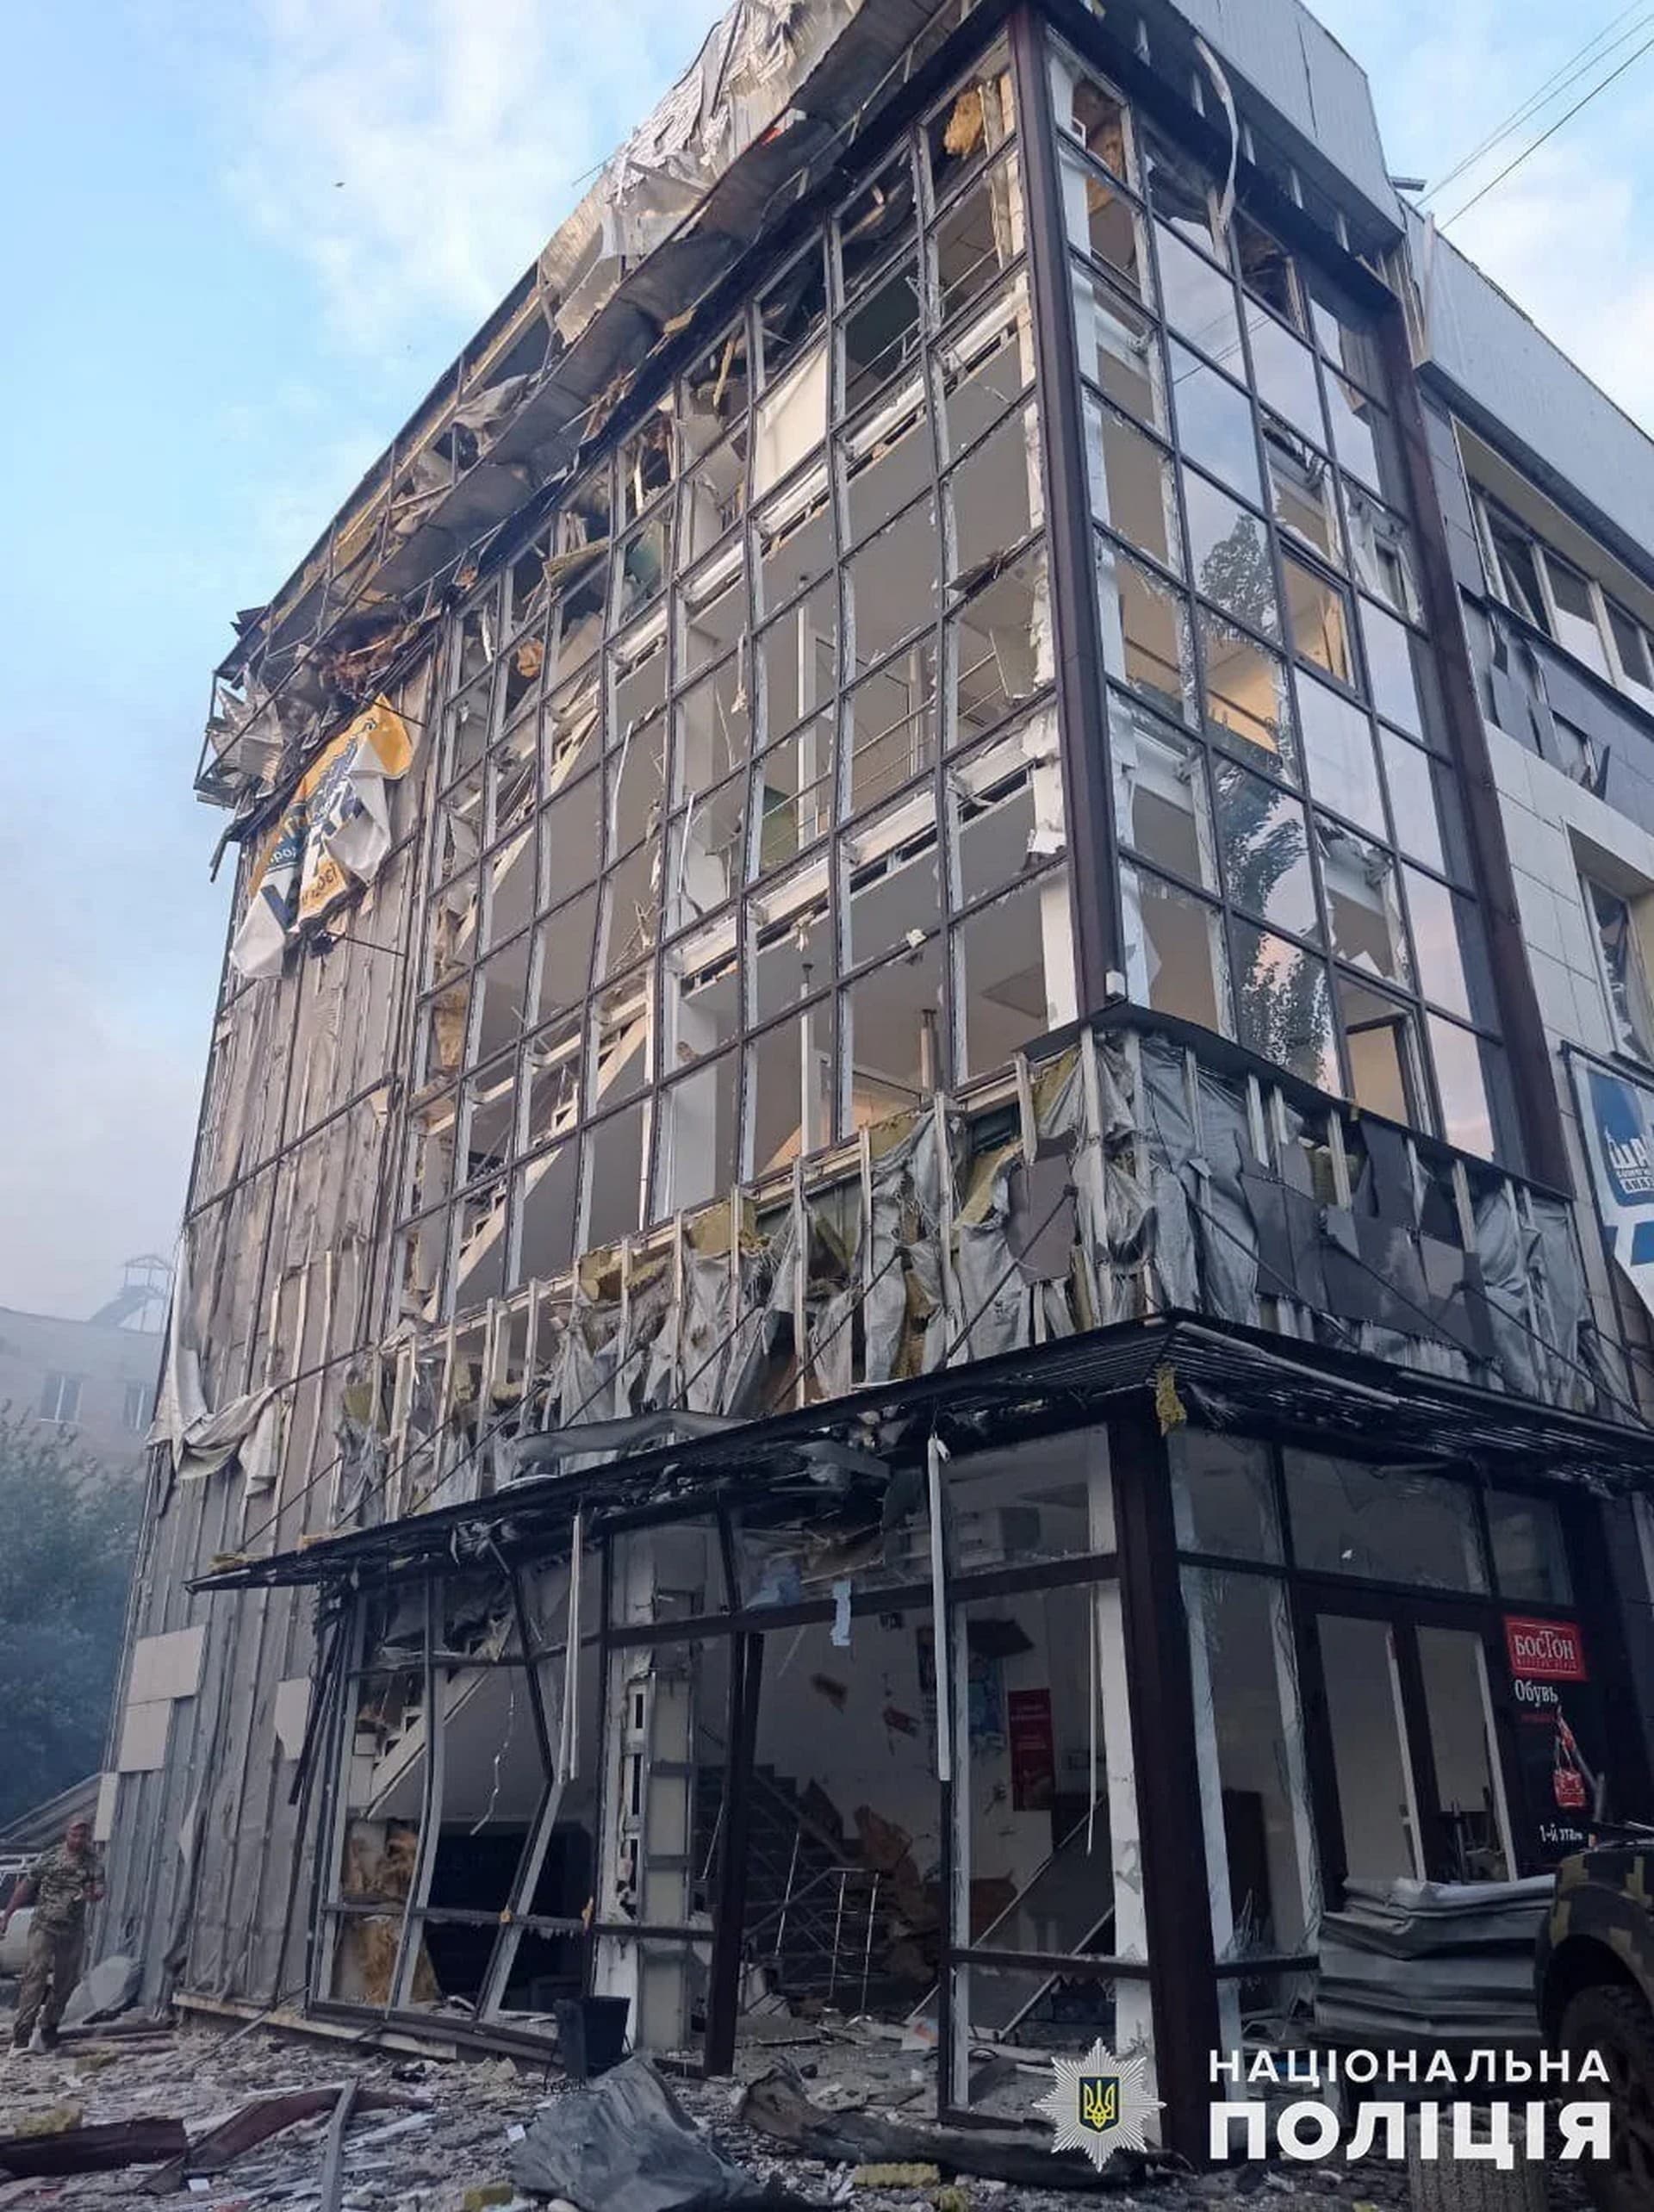 The building that was hit housed a well-known pizza restaurant